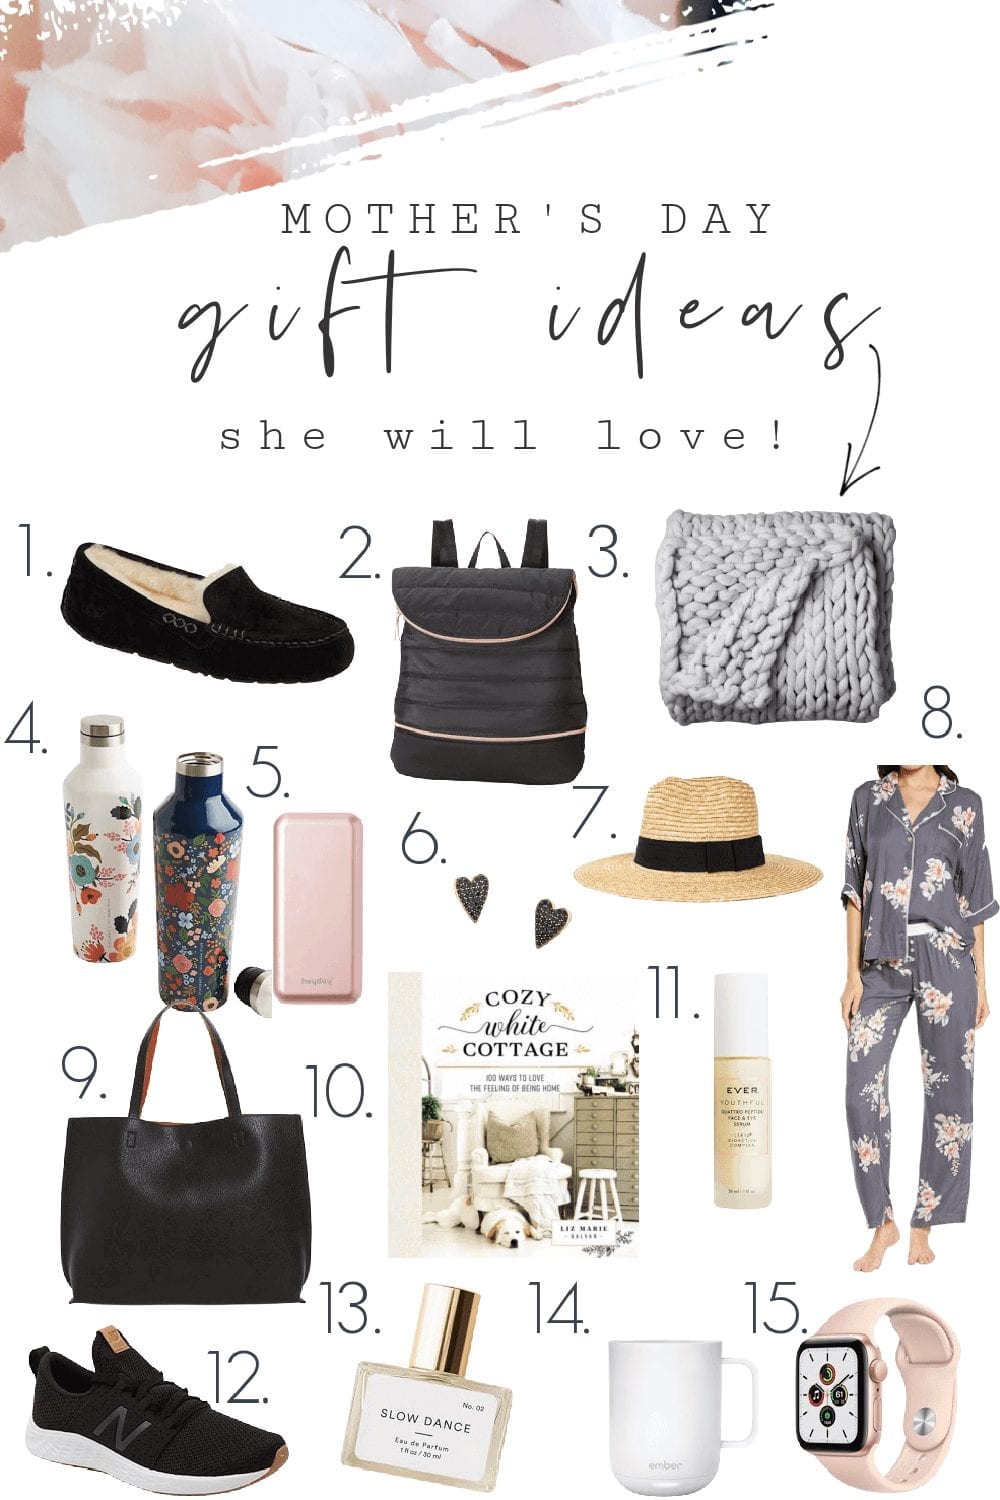 Mother's Day gift ideas she will love!